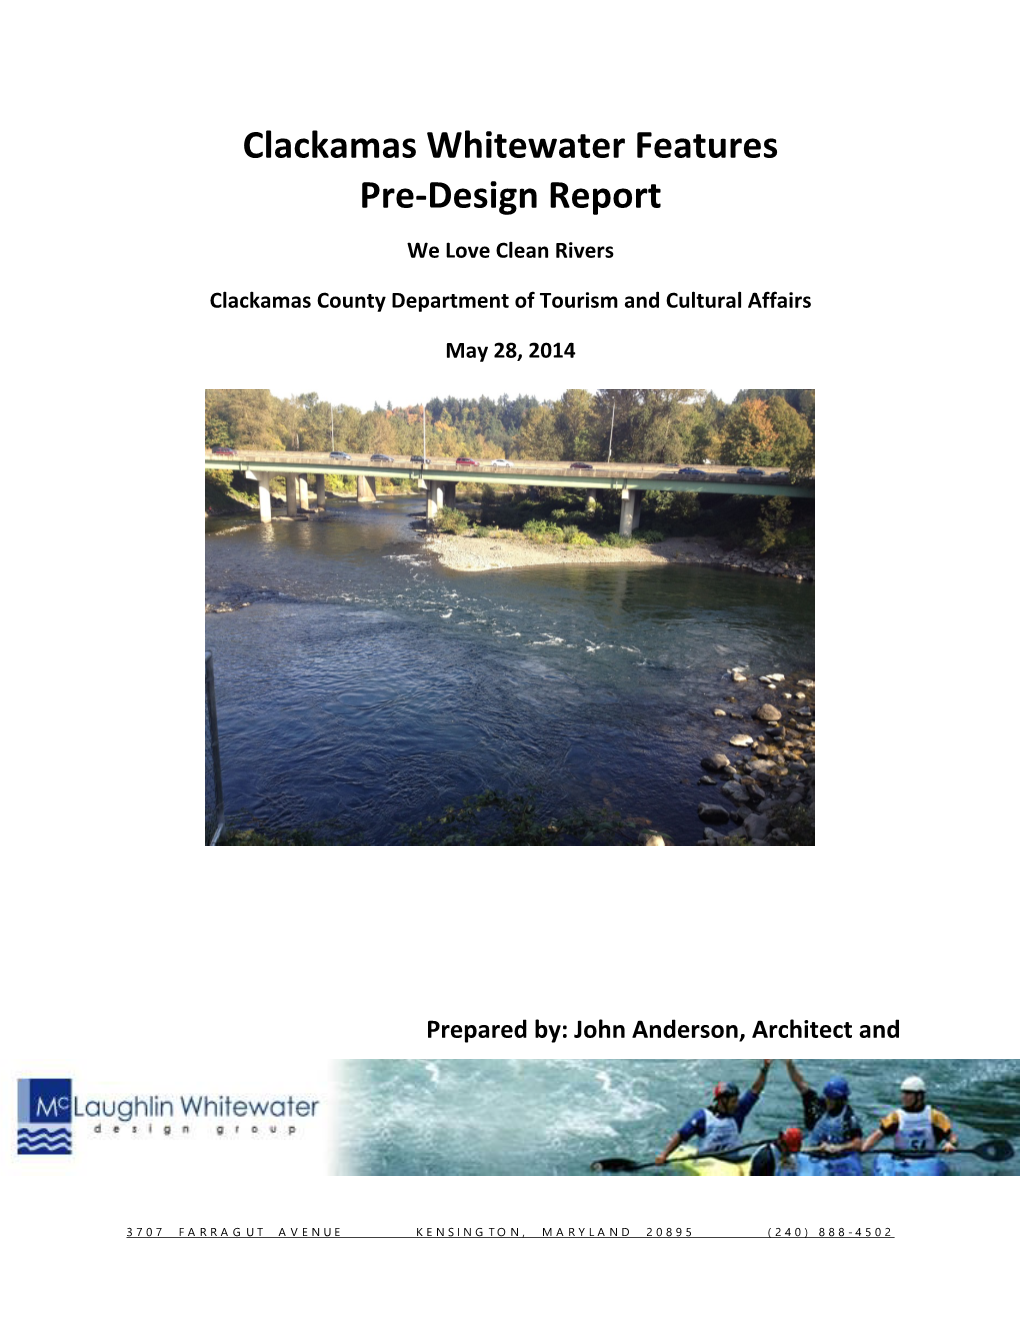 Clackamas Whitewater Features Pre-Design Report